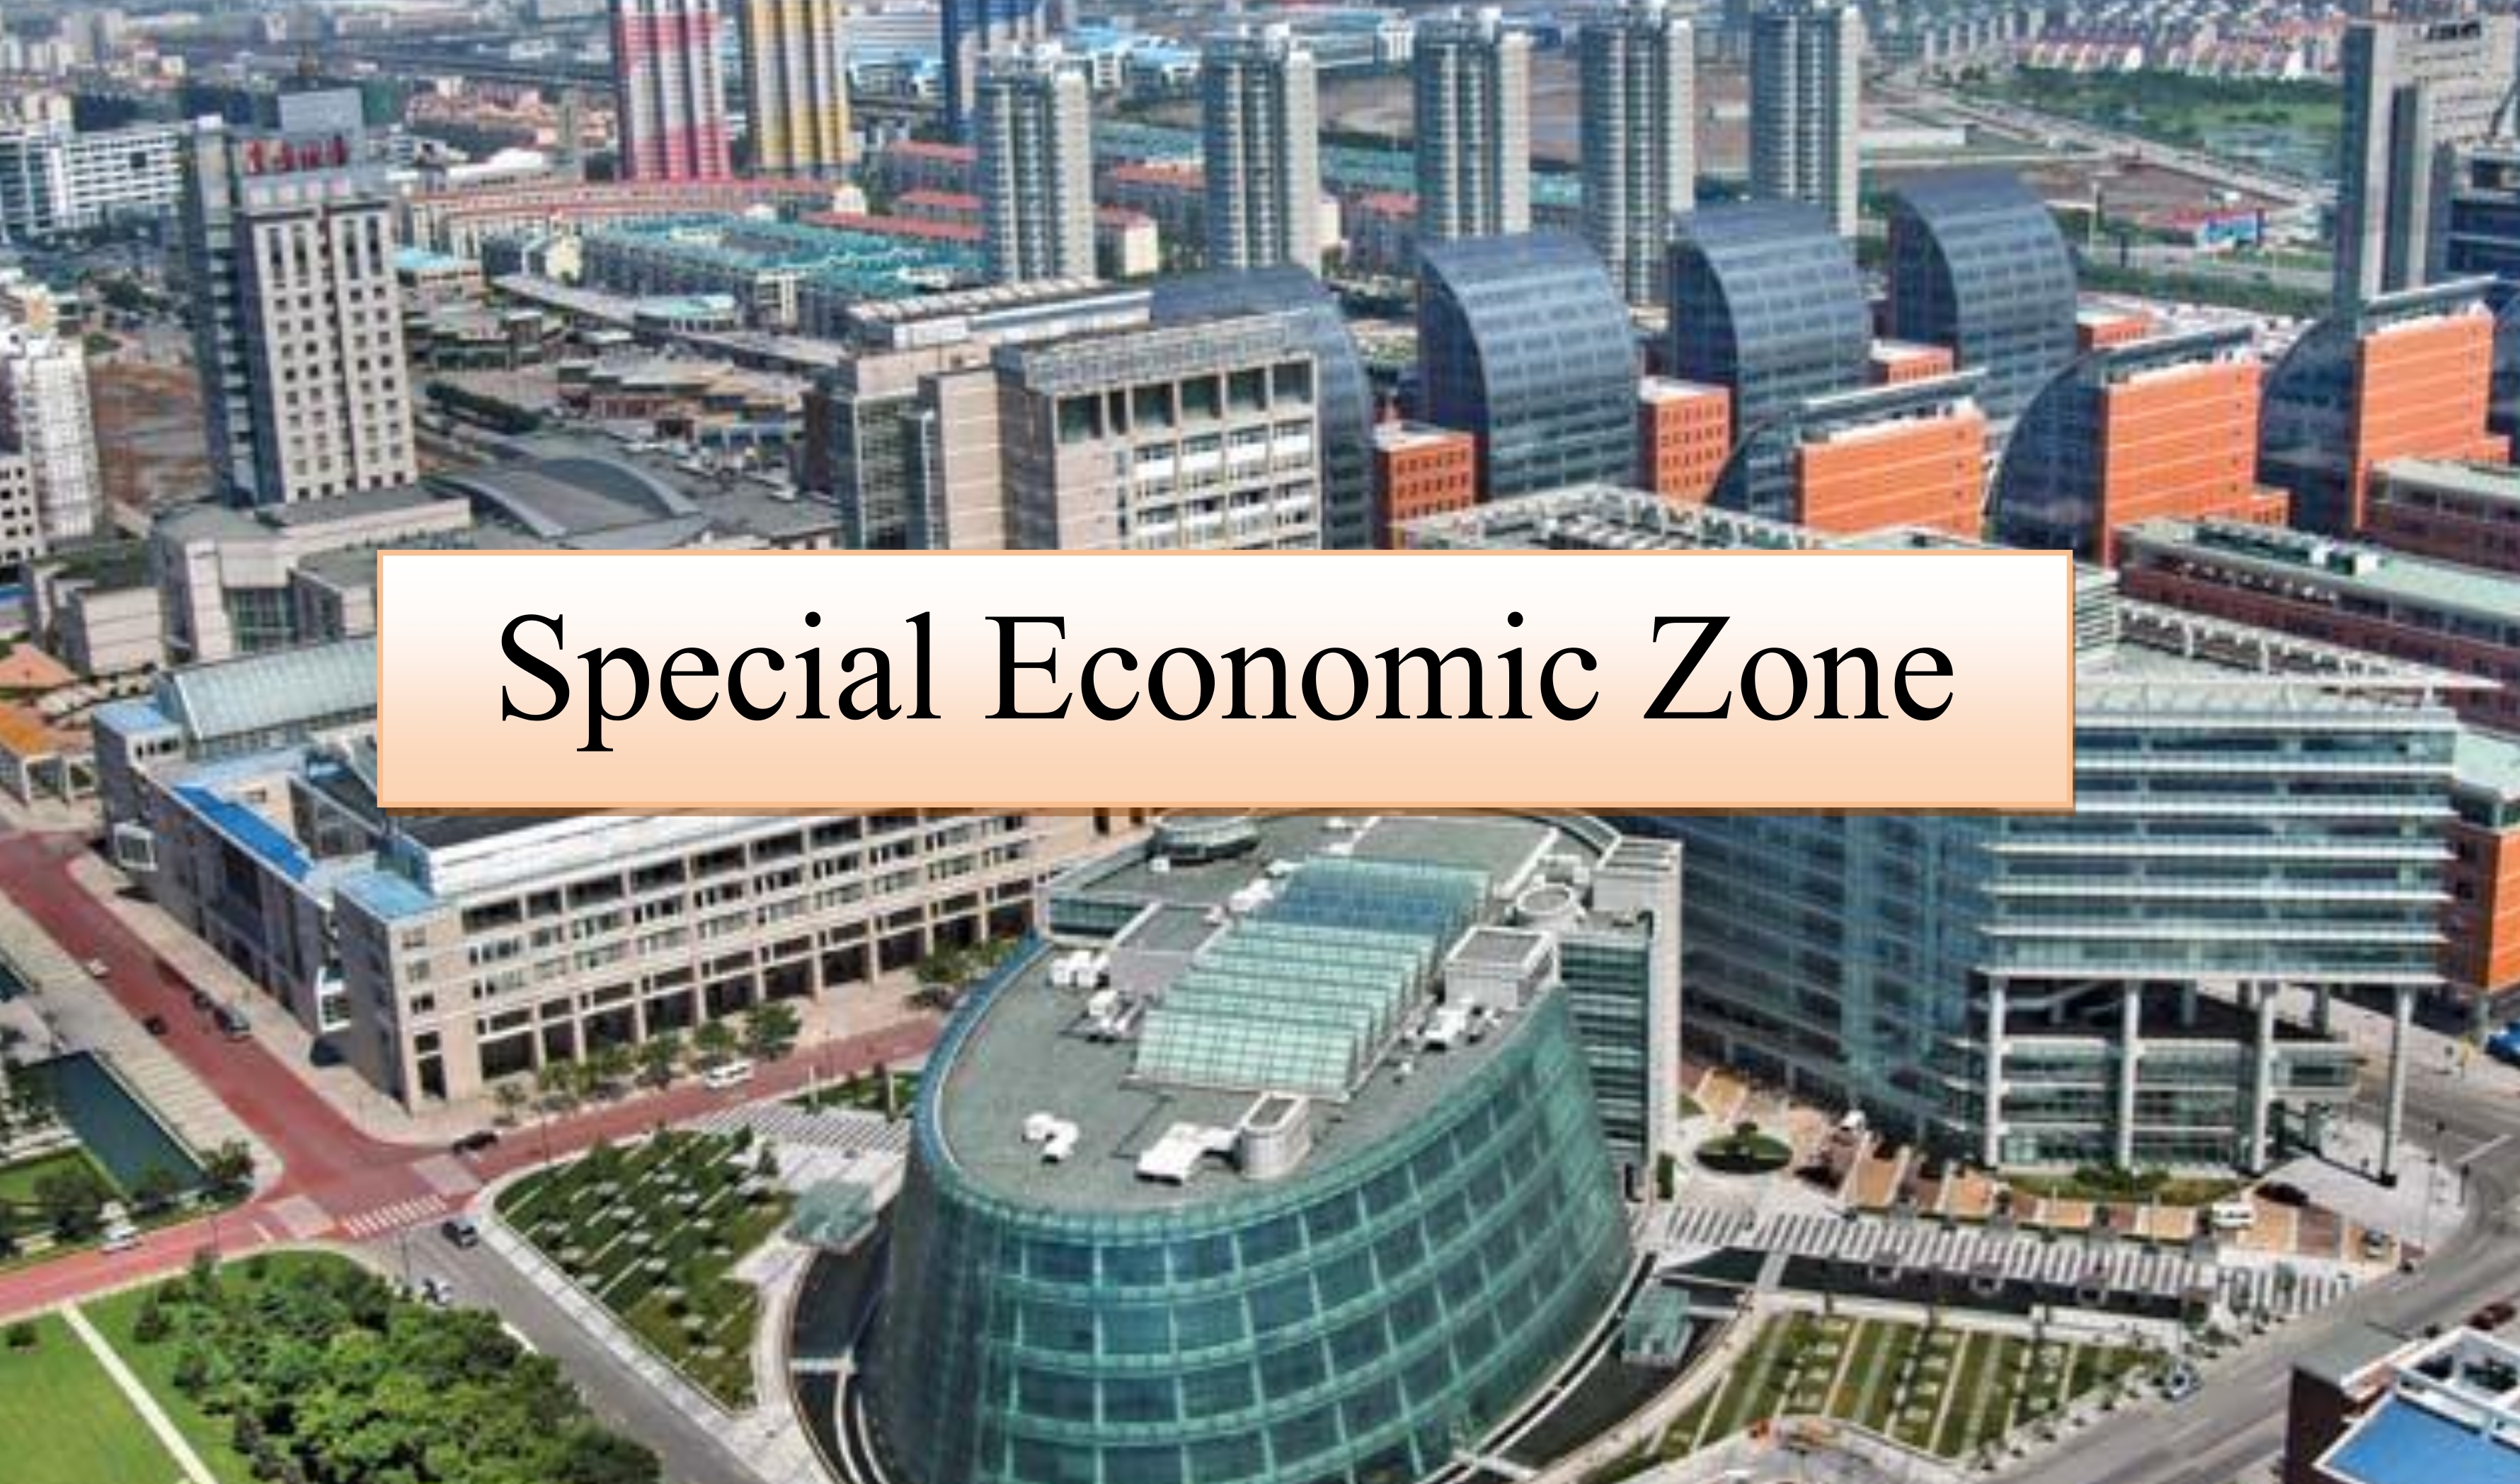 IT SEZ, IT SEZ in India, Future of IRT SEZ in India, Commercial real estate in India, Realities of IT SEZ in India, IT SEZ Report Card, Investment in IT SEZ, India real estate news, Indian realty news, Real estate news India, Indian property market news, Track2Realty